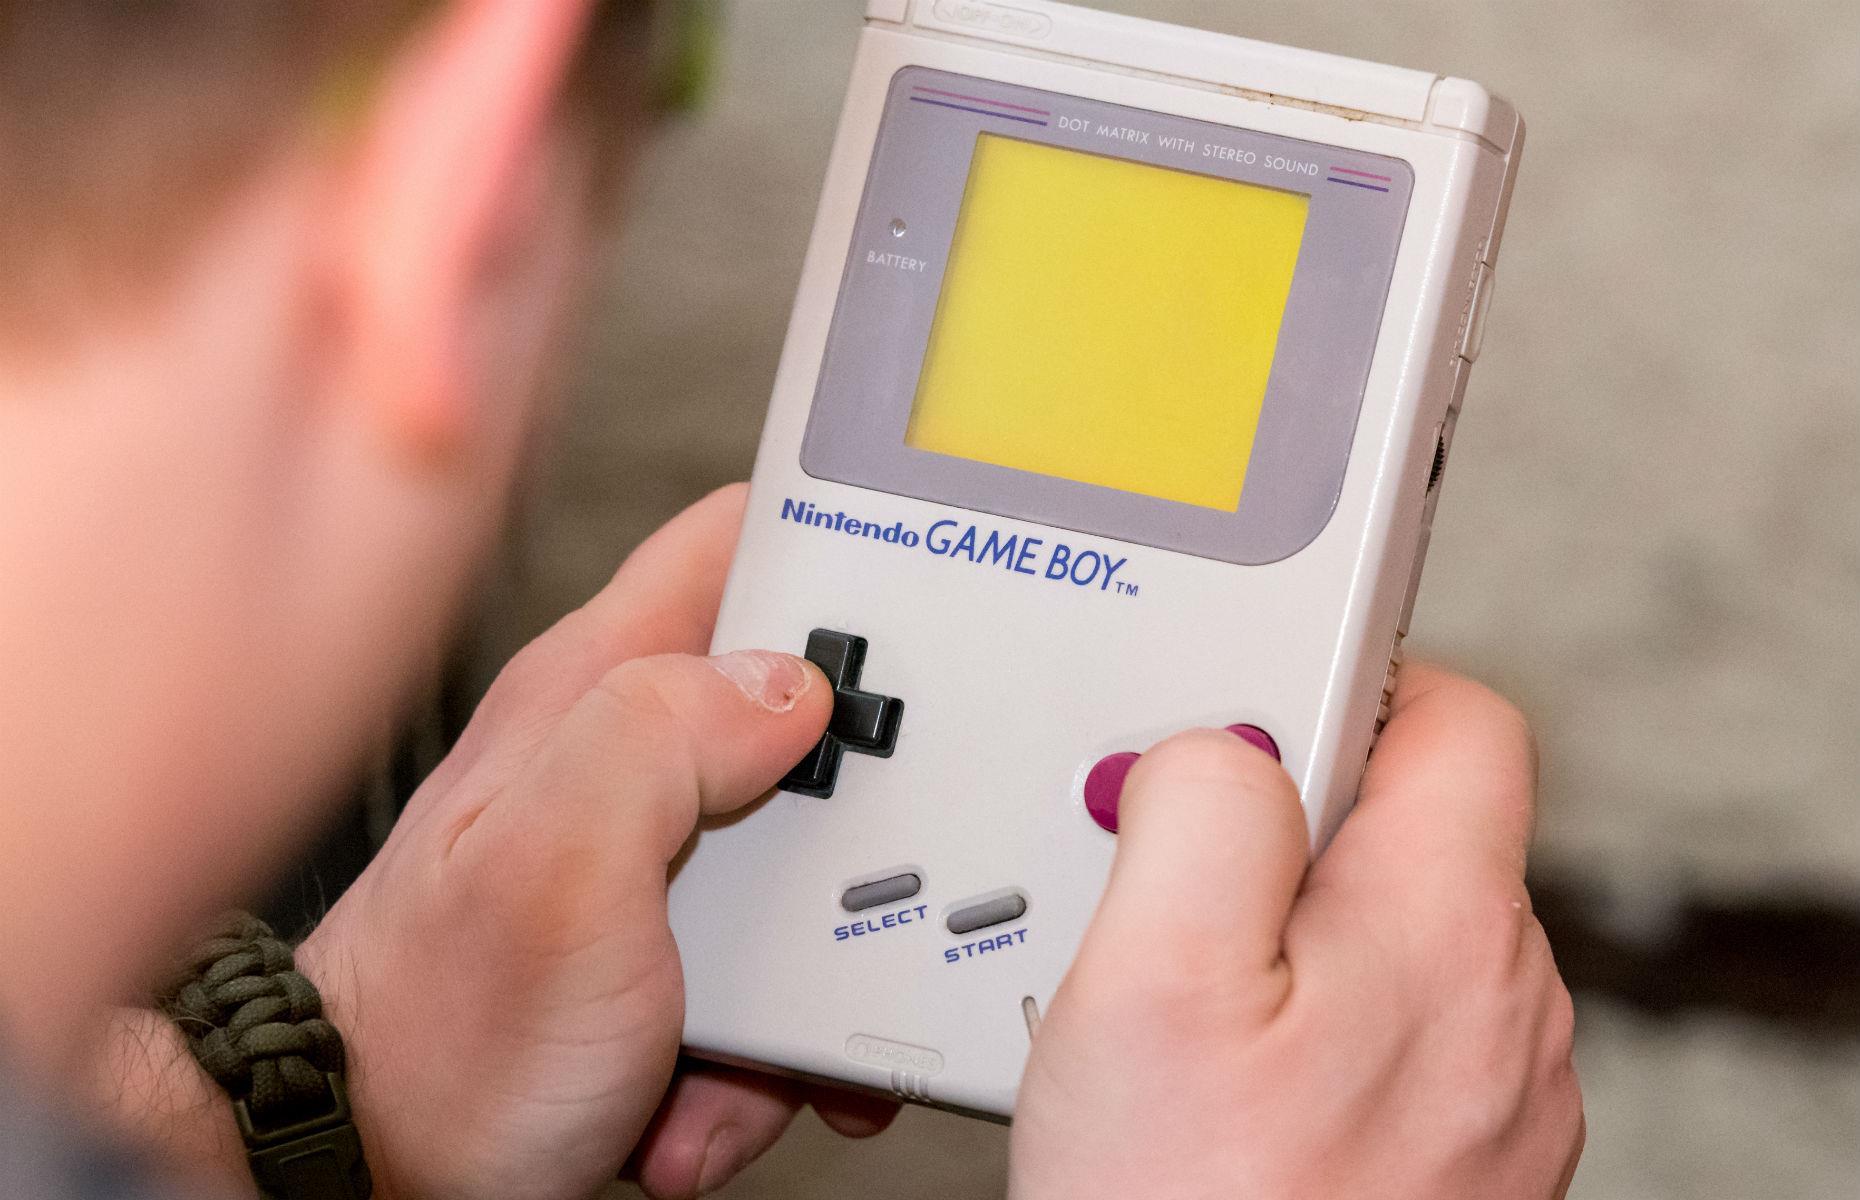 1989: handheld games console